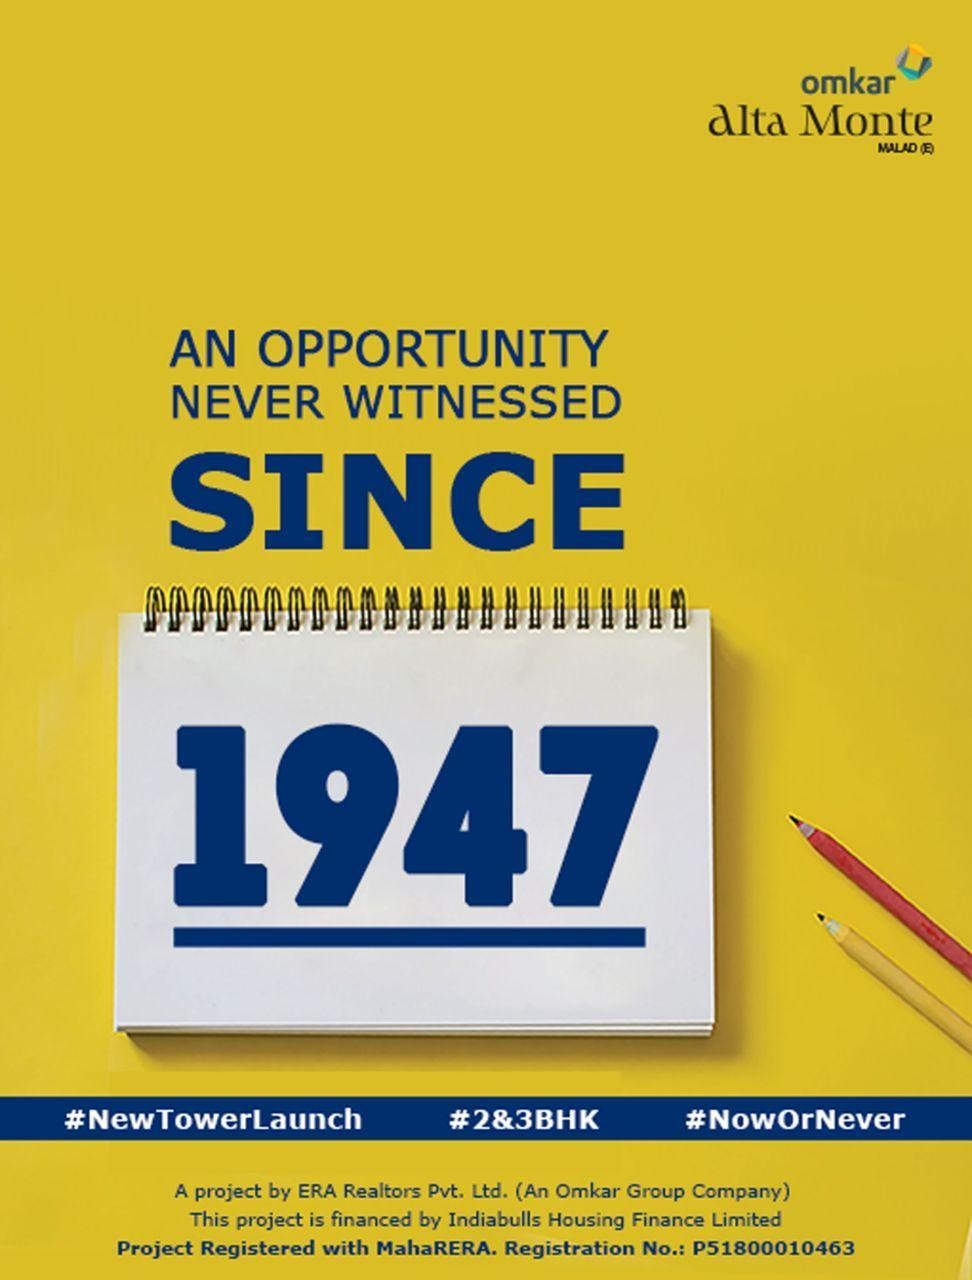 An opportunity never witnessed since 1947 at Omkar Alta Monte in Mumbai